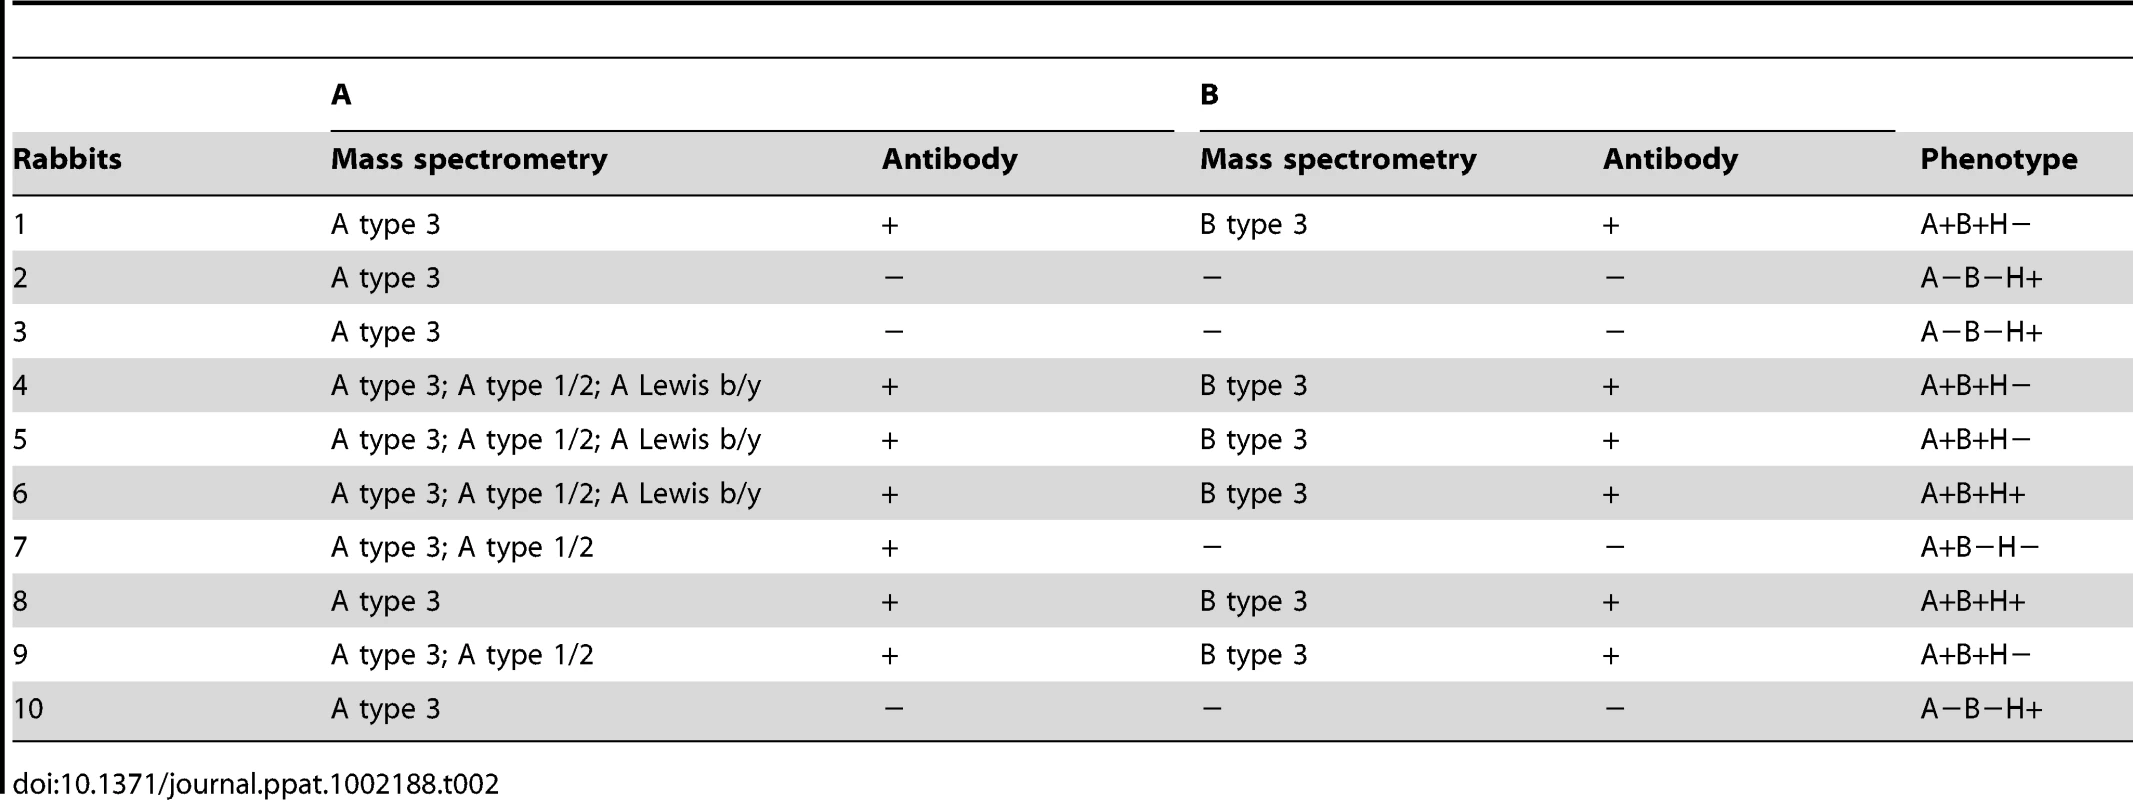 Detection of A and B with mass spectrometry and antibodies.